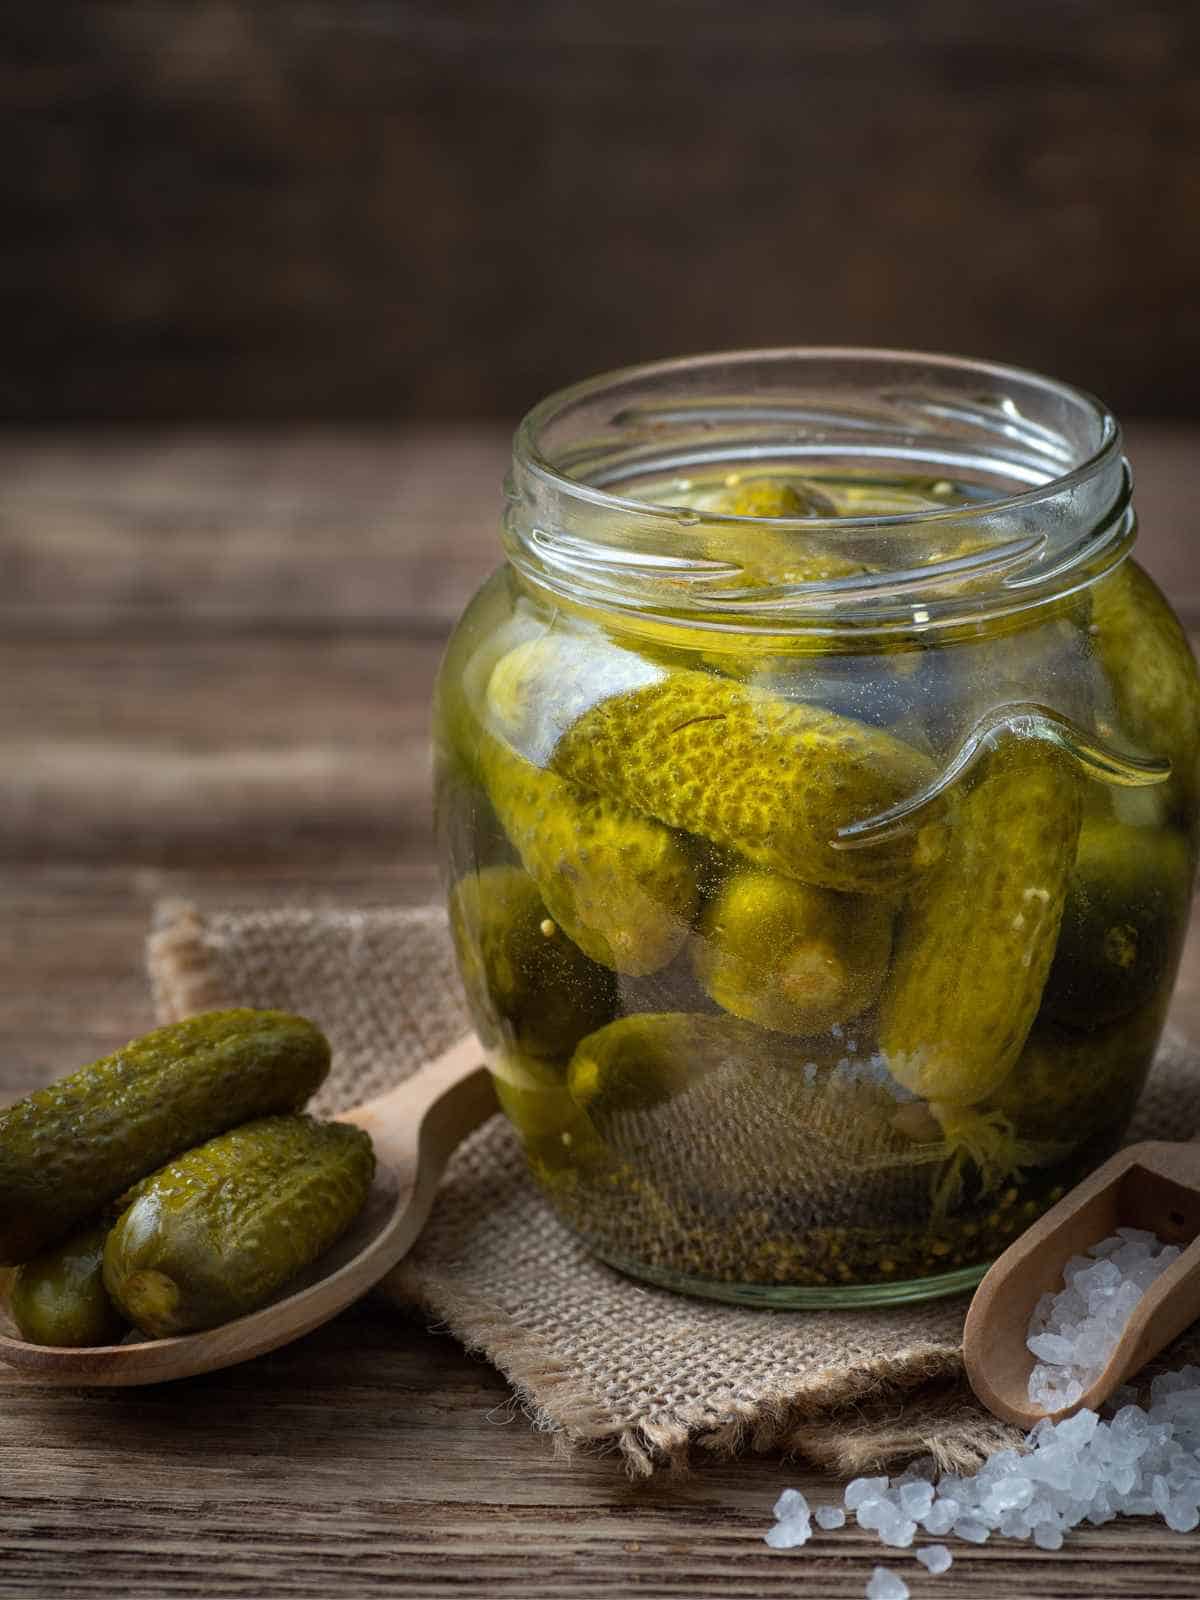 do pickles need to be refrigerated